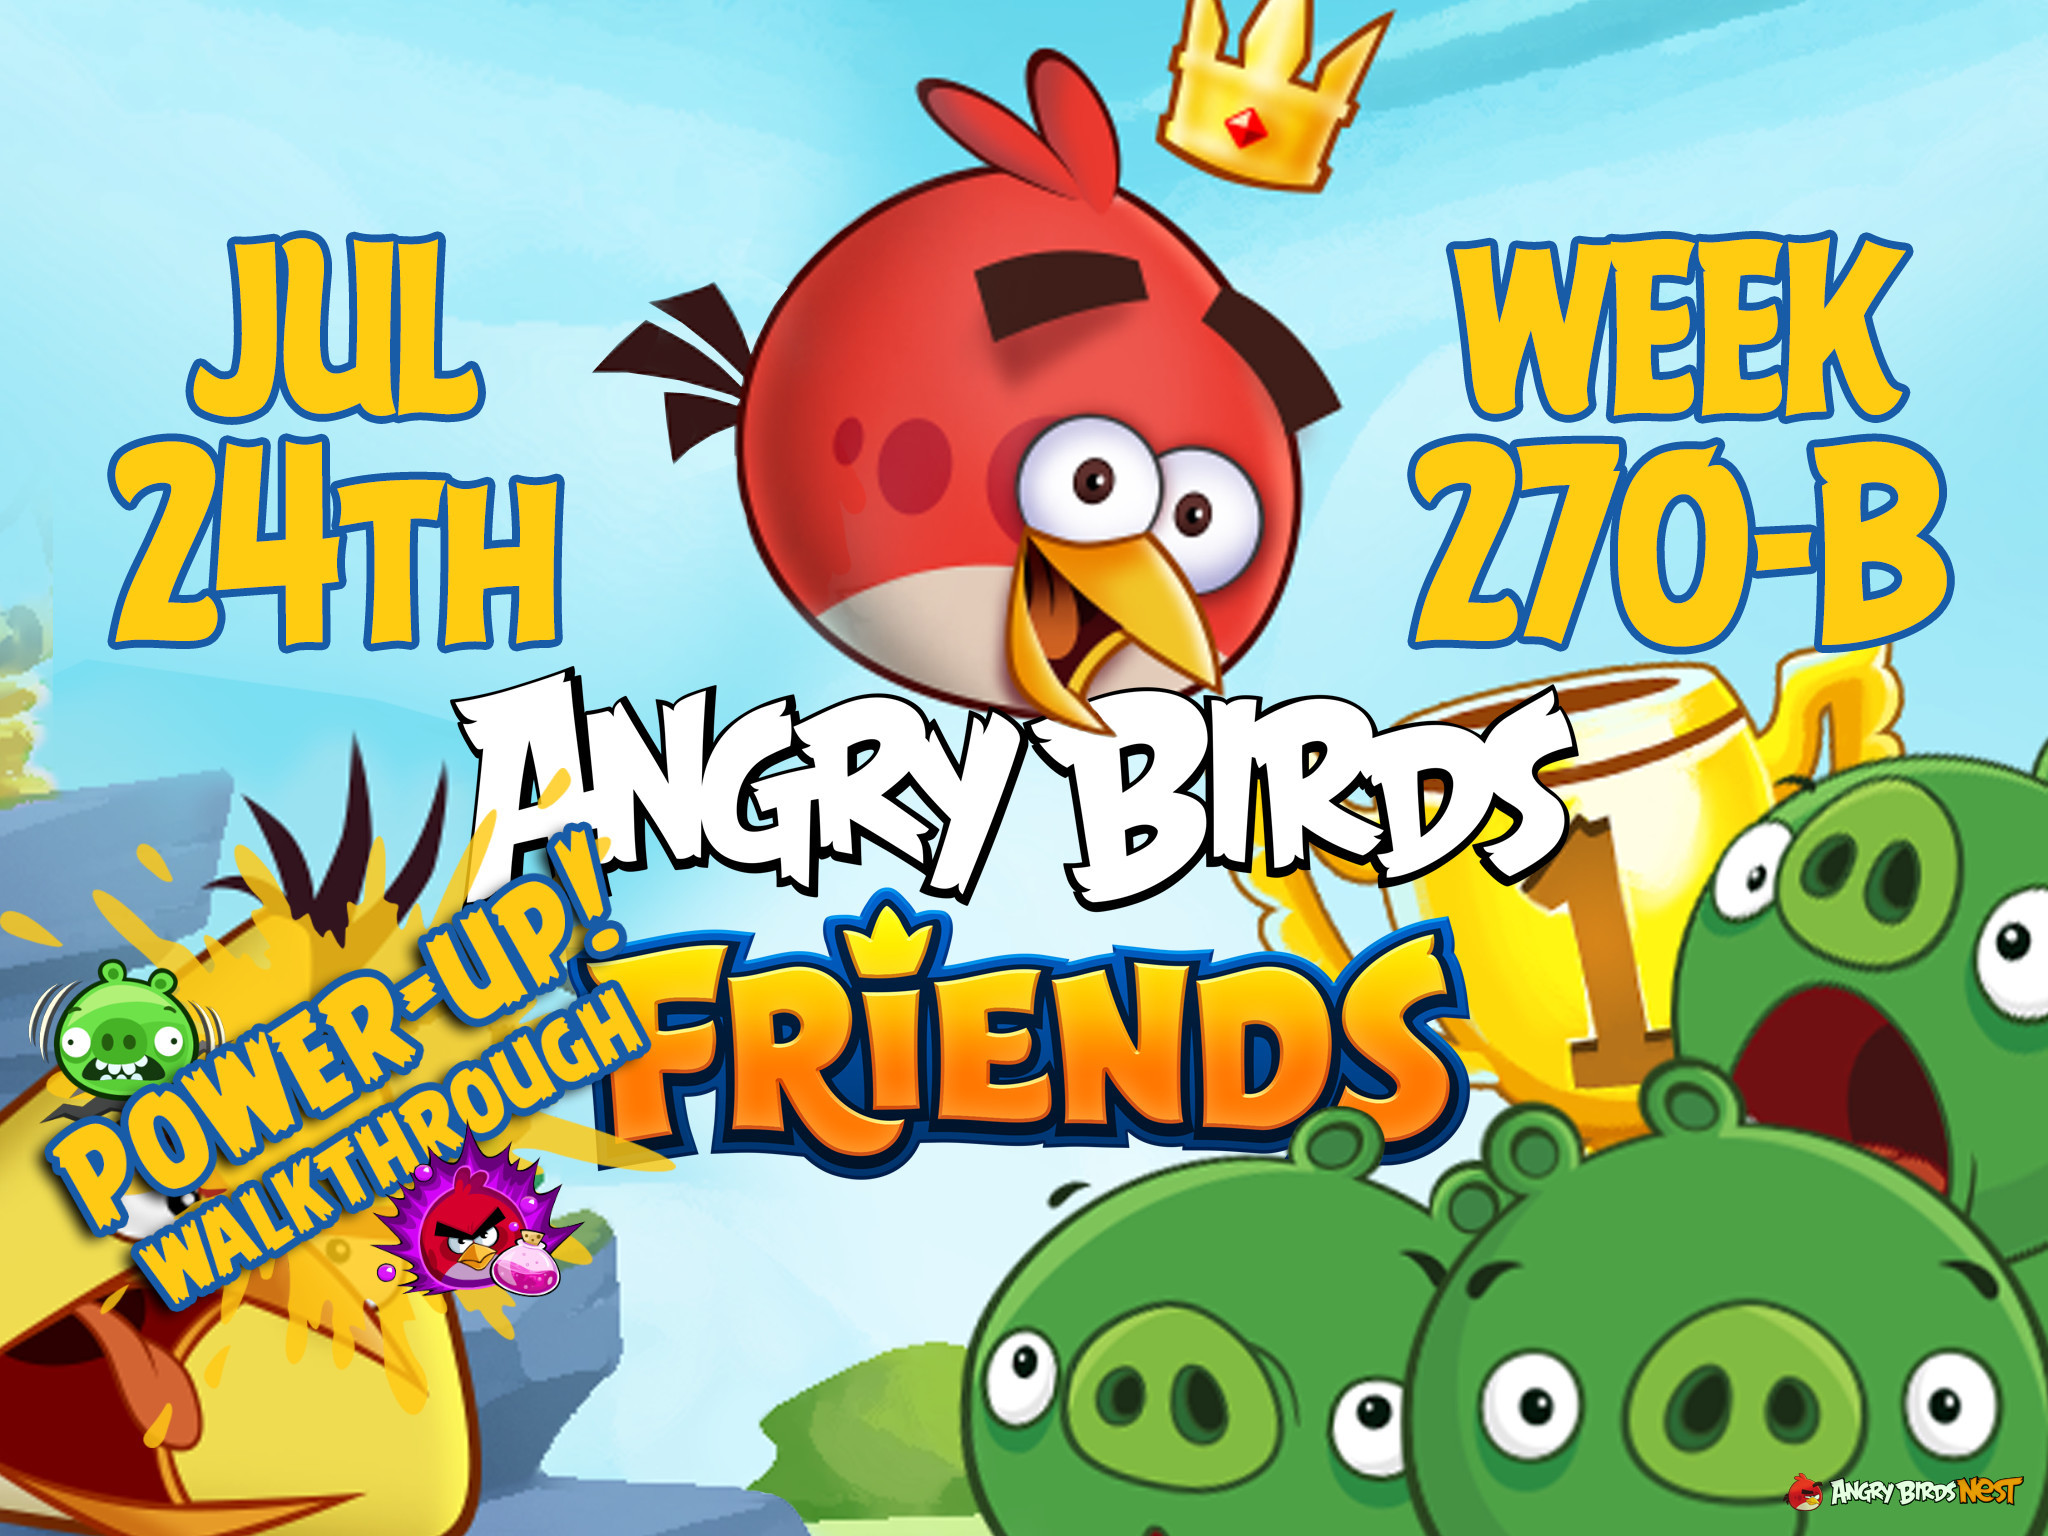 Angry Birds Friends Tournament Week 270-B Feature Image PU